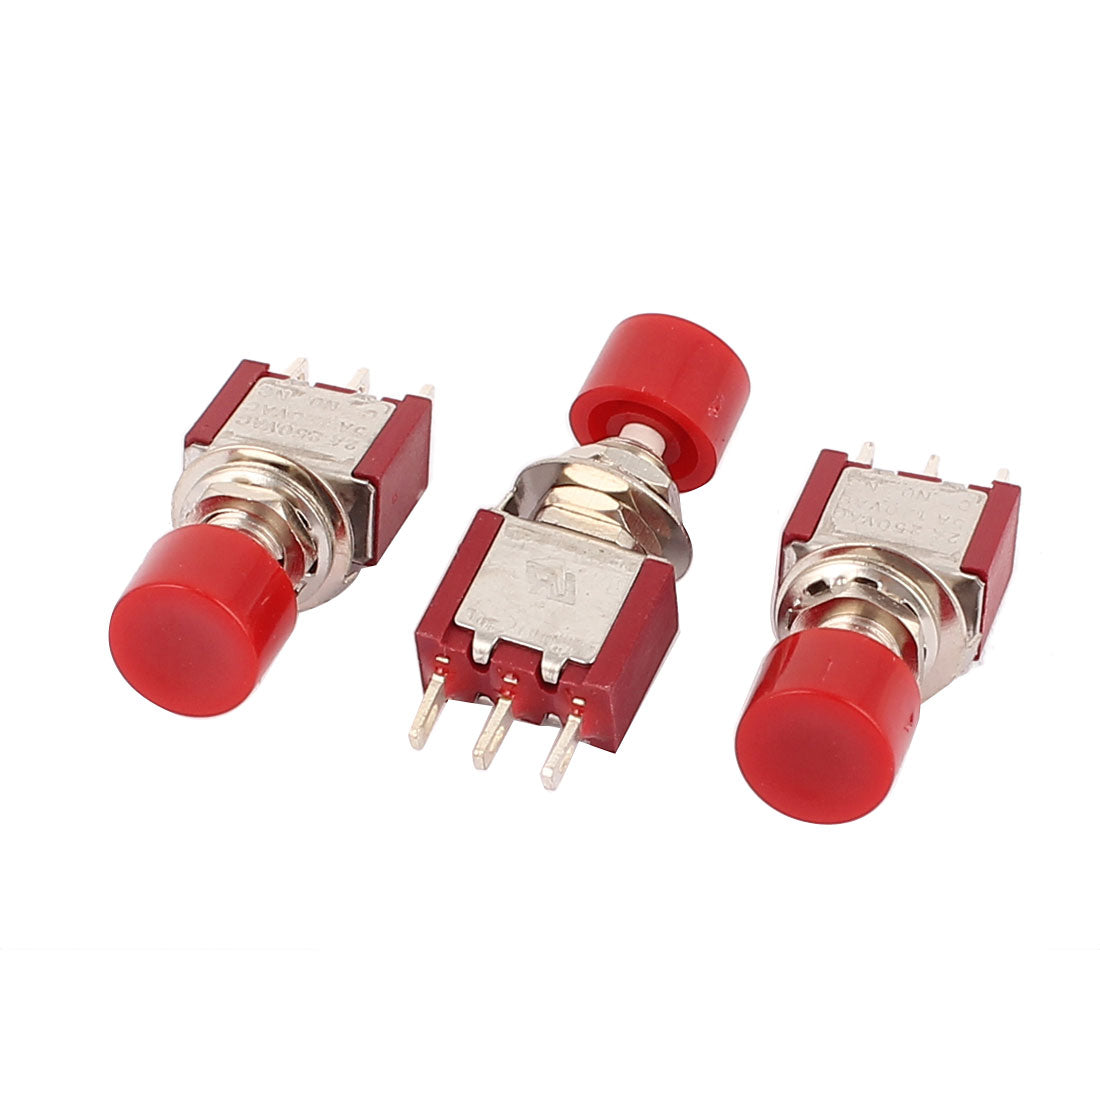 uxcell Uxcell 3 Pcs NO-NC 2 Position SPDT Momentary Toggle Switch AC 120V/5A 250V/2A Red